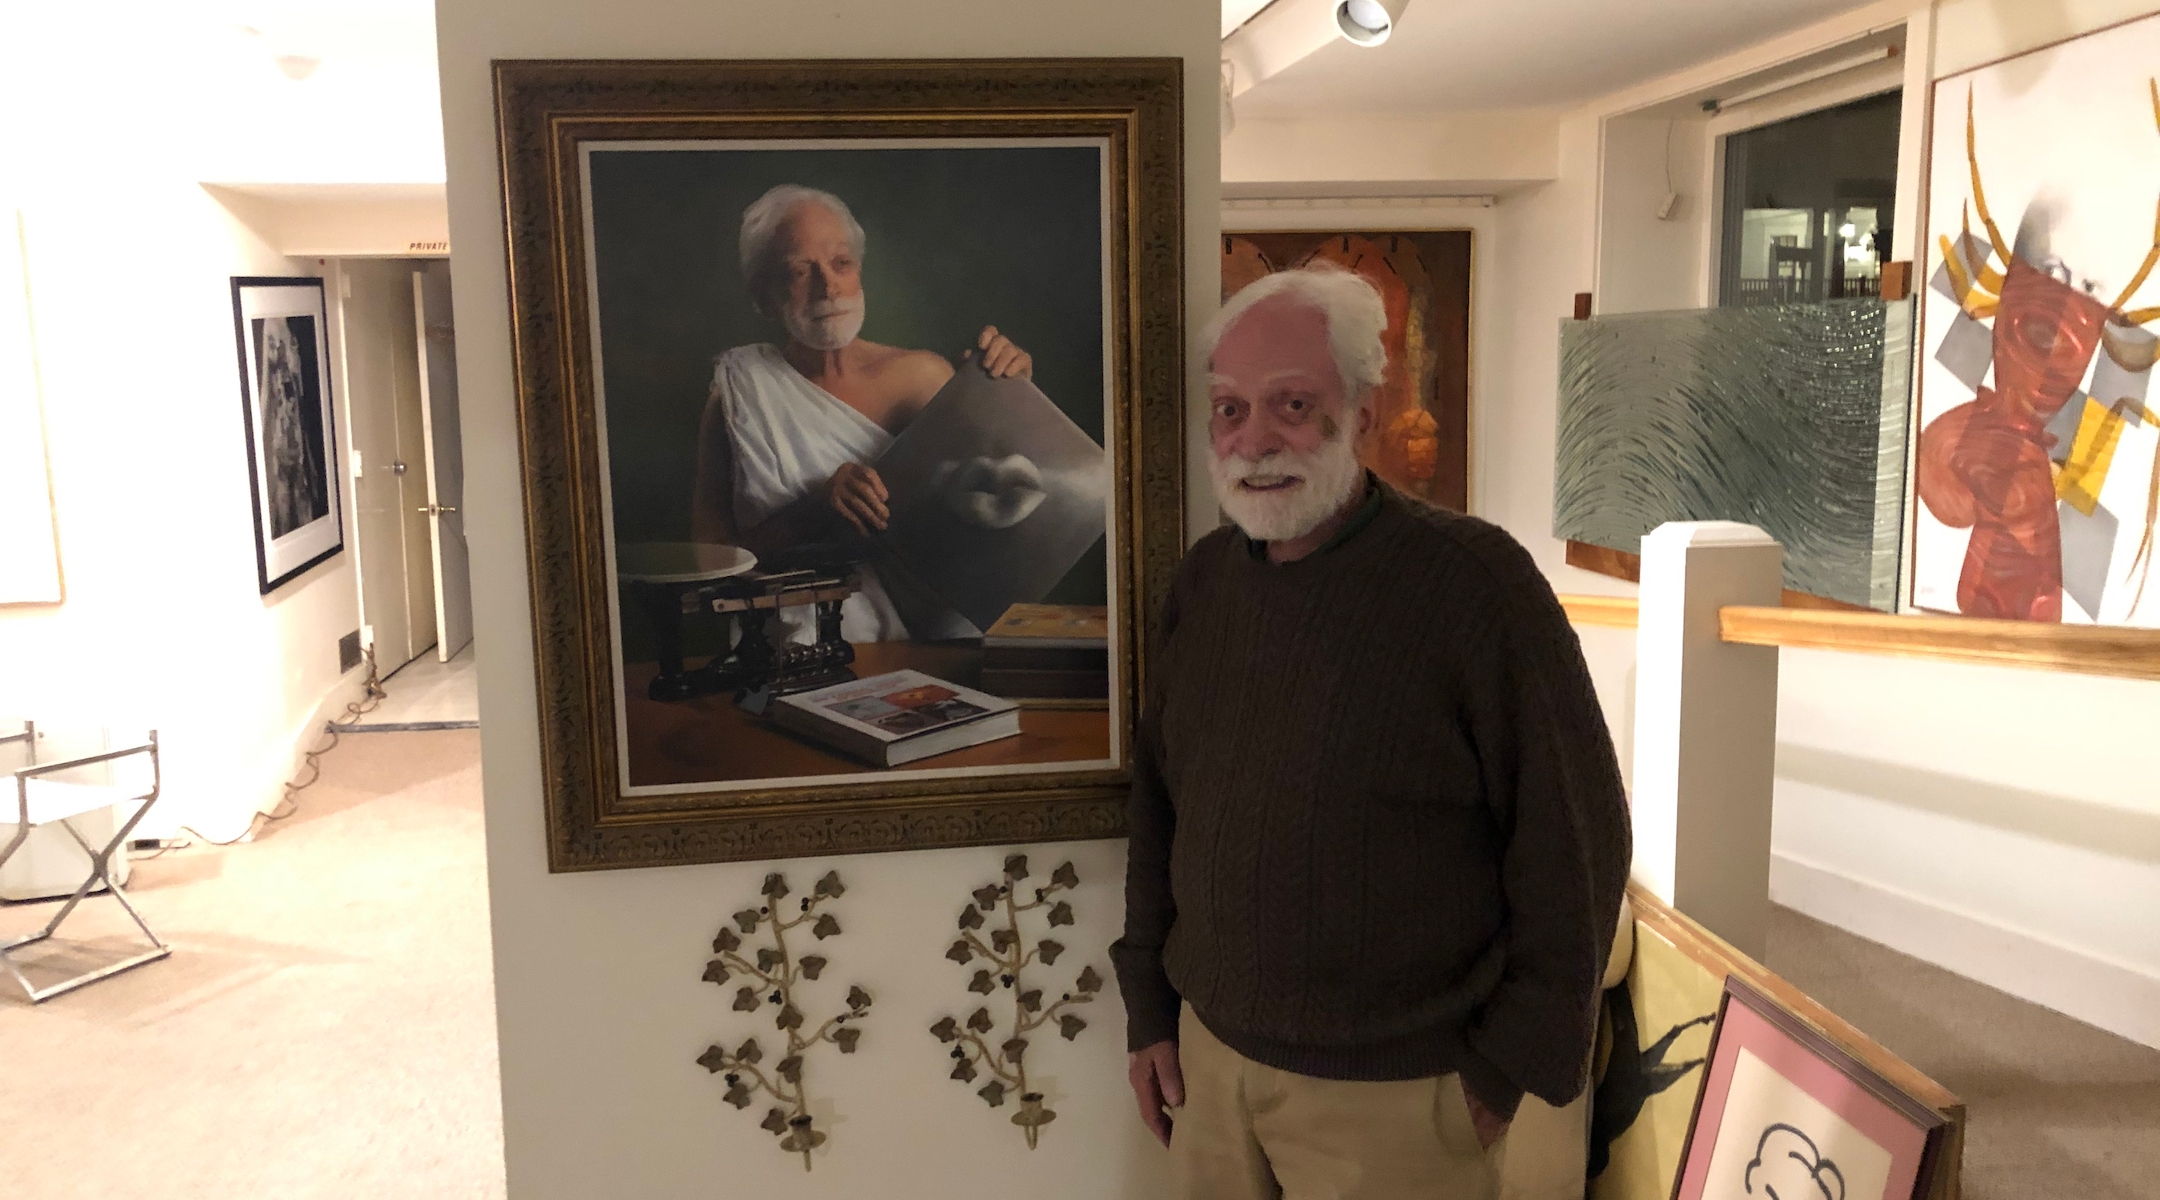 A smiling elderly man poses in front of a Classical-style painting of himself in ancient Greek clothing, posed like a philosopher of old